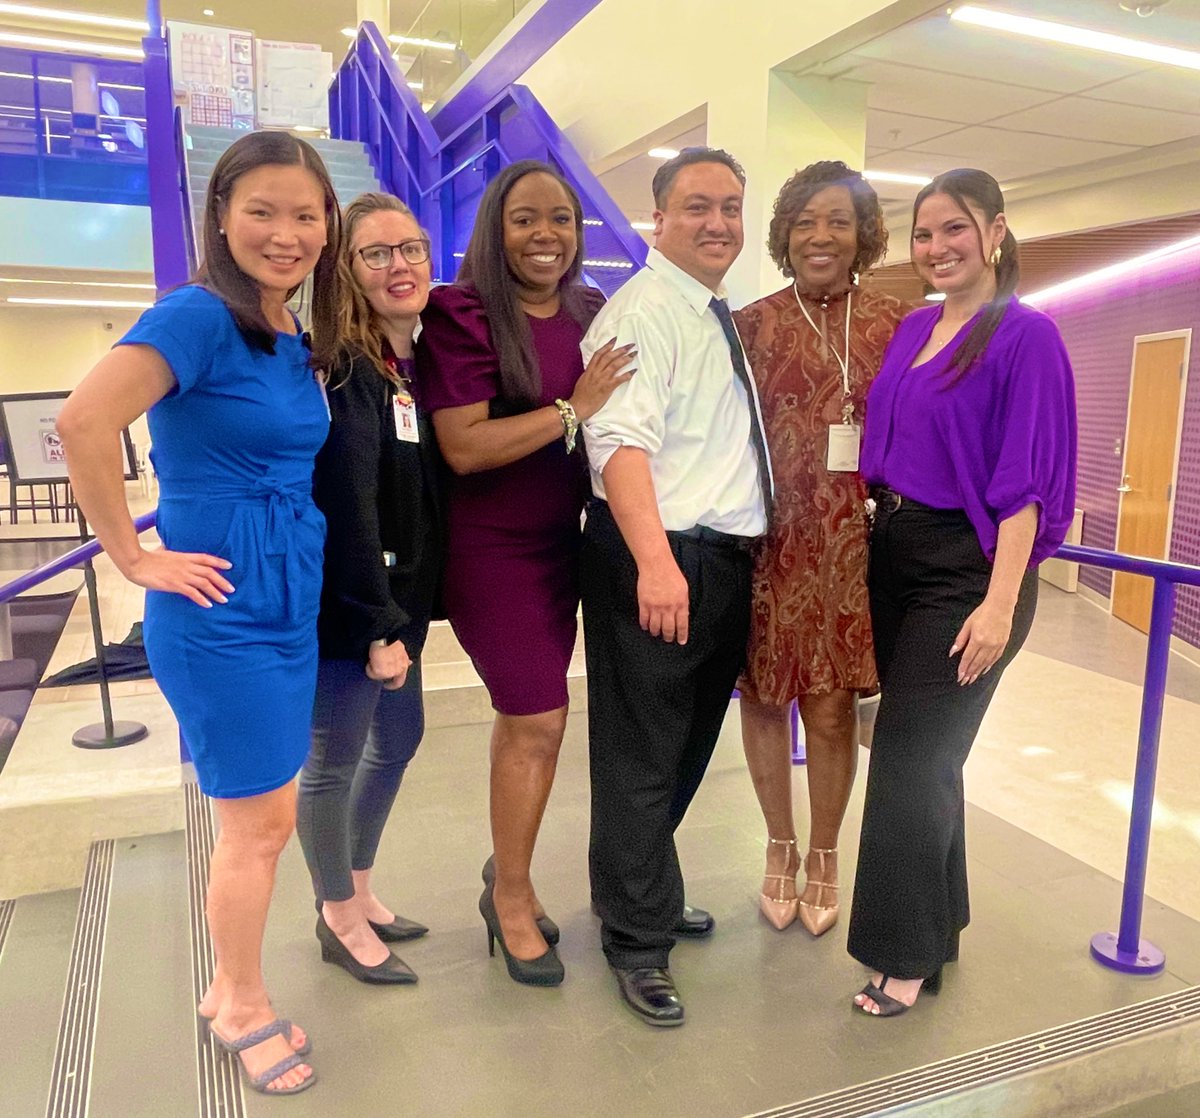 It was such a grand evening welcoming home, Executive Principal Sheila Henry. Vertical team principal @JoseLMejia452 from @GusGarciaYMLA is always in the building showing support! #JagNation💜